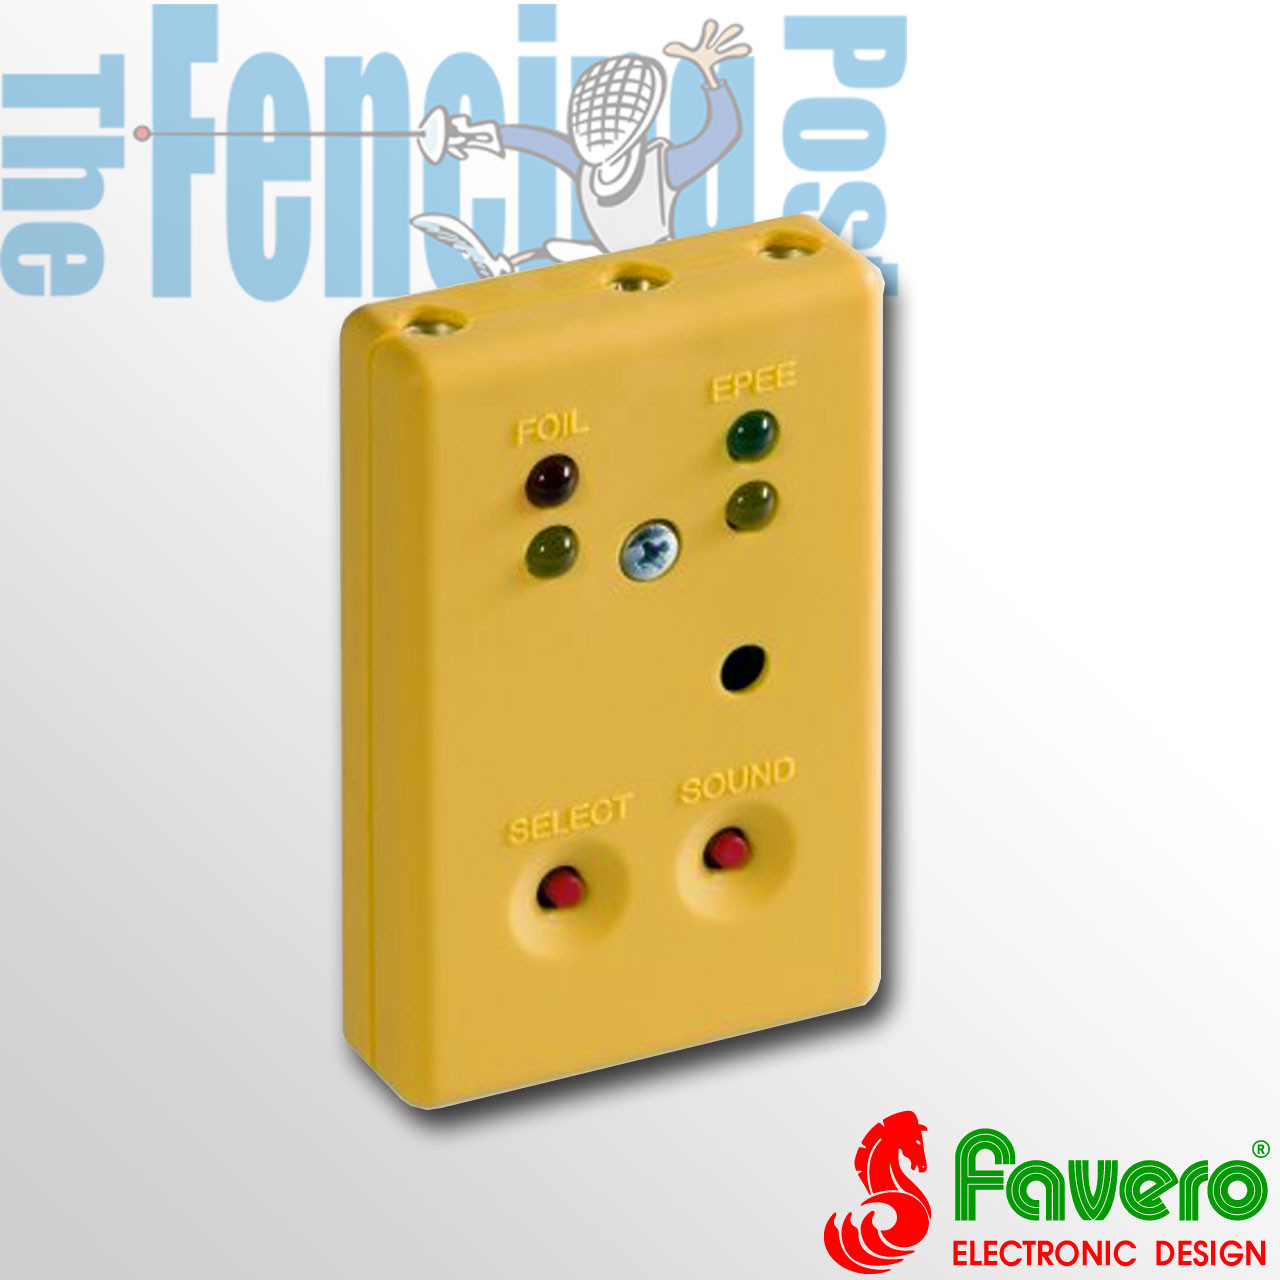 NEW! Favero Foil Mini Sound Buzzer Device for Electric Fencing made in Italy 